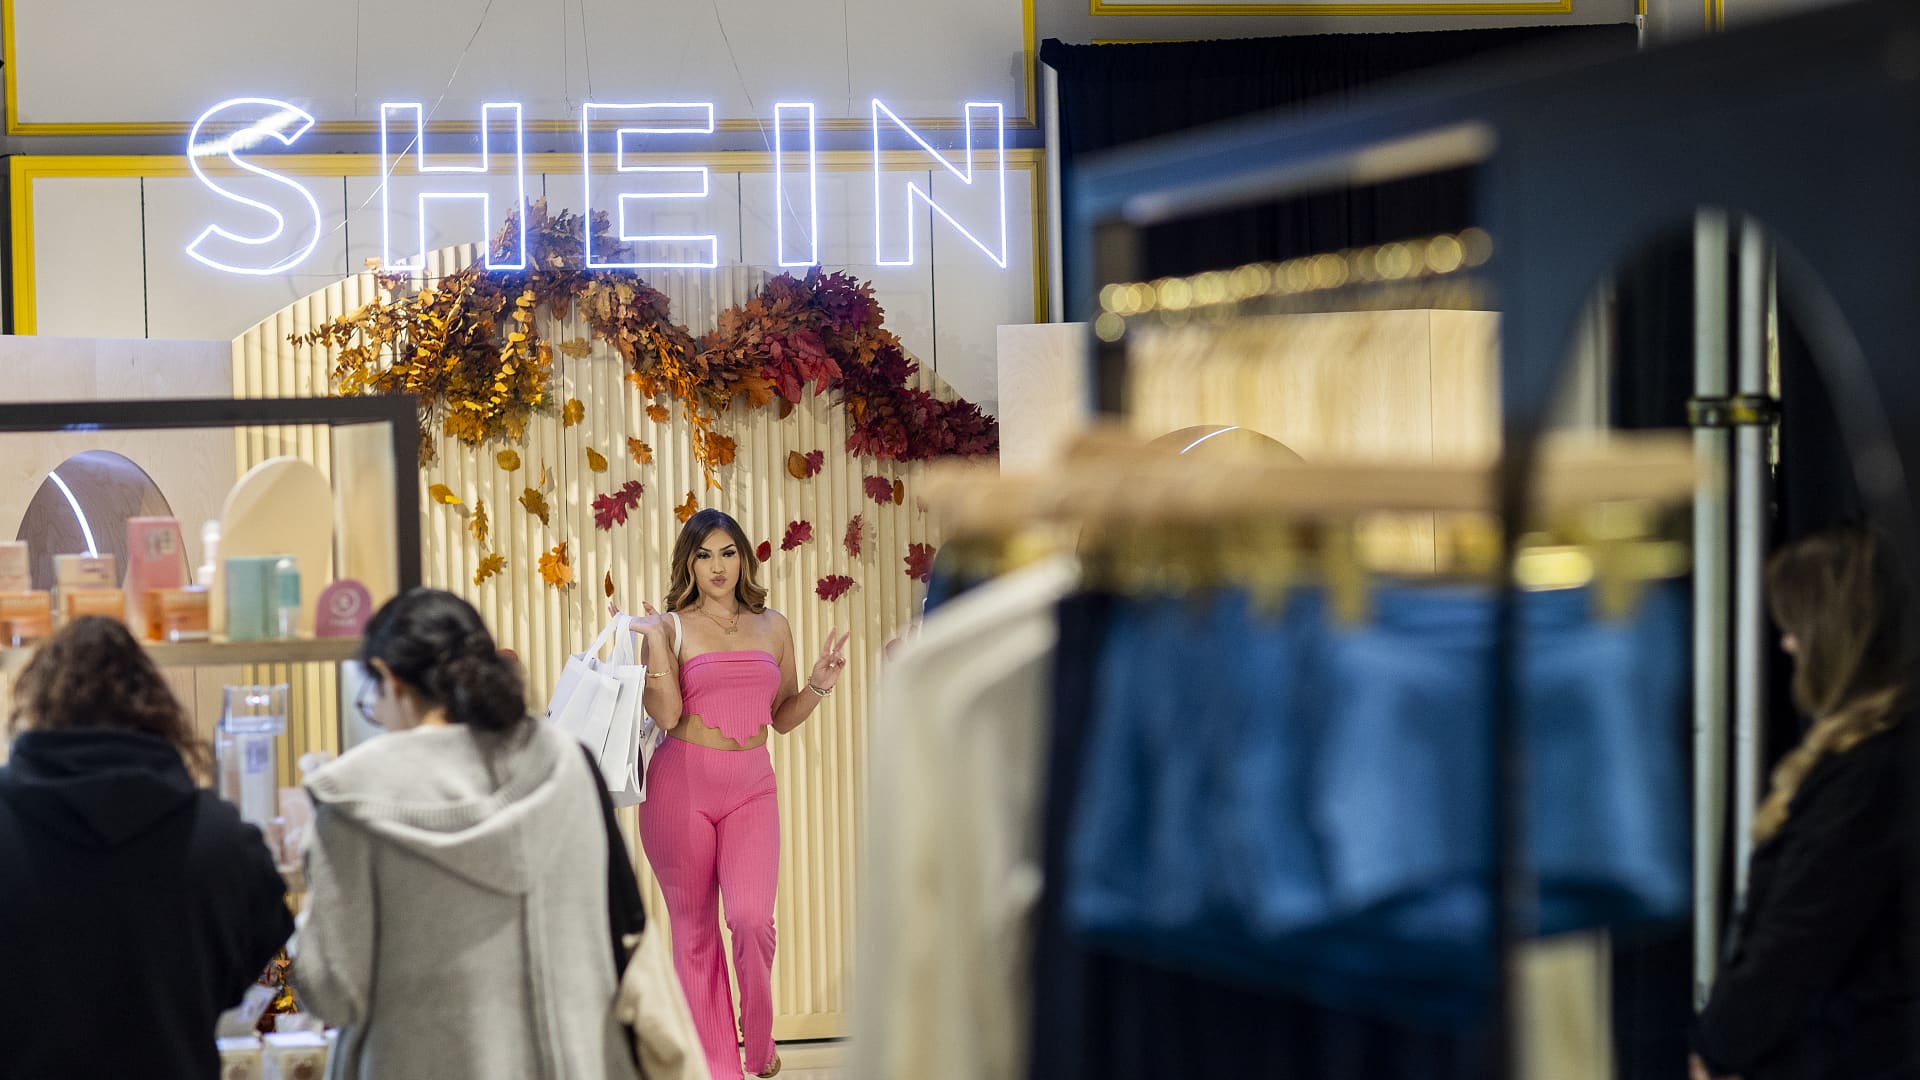 Shoppers Ashley Sanchez, center, of Fontana, poses for her friend Joscelin Flores, not pictured, who was taking photos with their bags of merchandise after being among the first group of shoppers taking the opportunity to shop on the opening day of fast fashion e-commerce giant Shein, which is hosting a brick-and-mortar pop up inside Forever 21 at the Ontario Mills Mall in Ontario Thursday, Oct. 19, 2023.(Allen J. Schaben / Los Angeles Times via Getty Images)